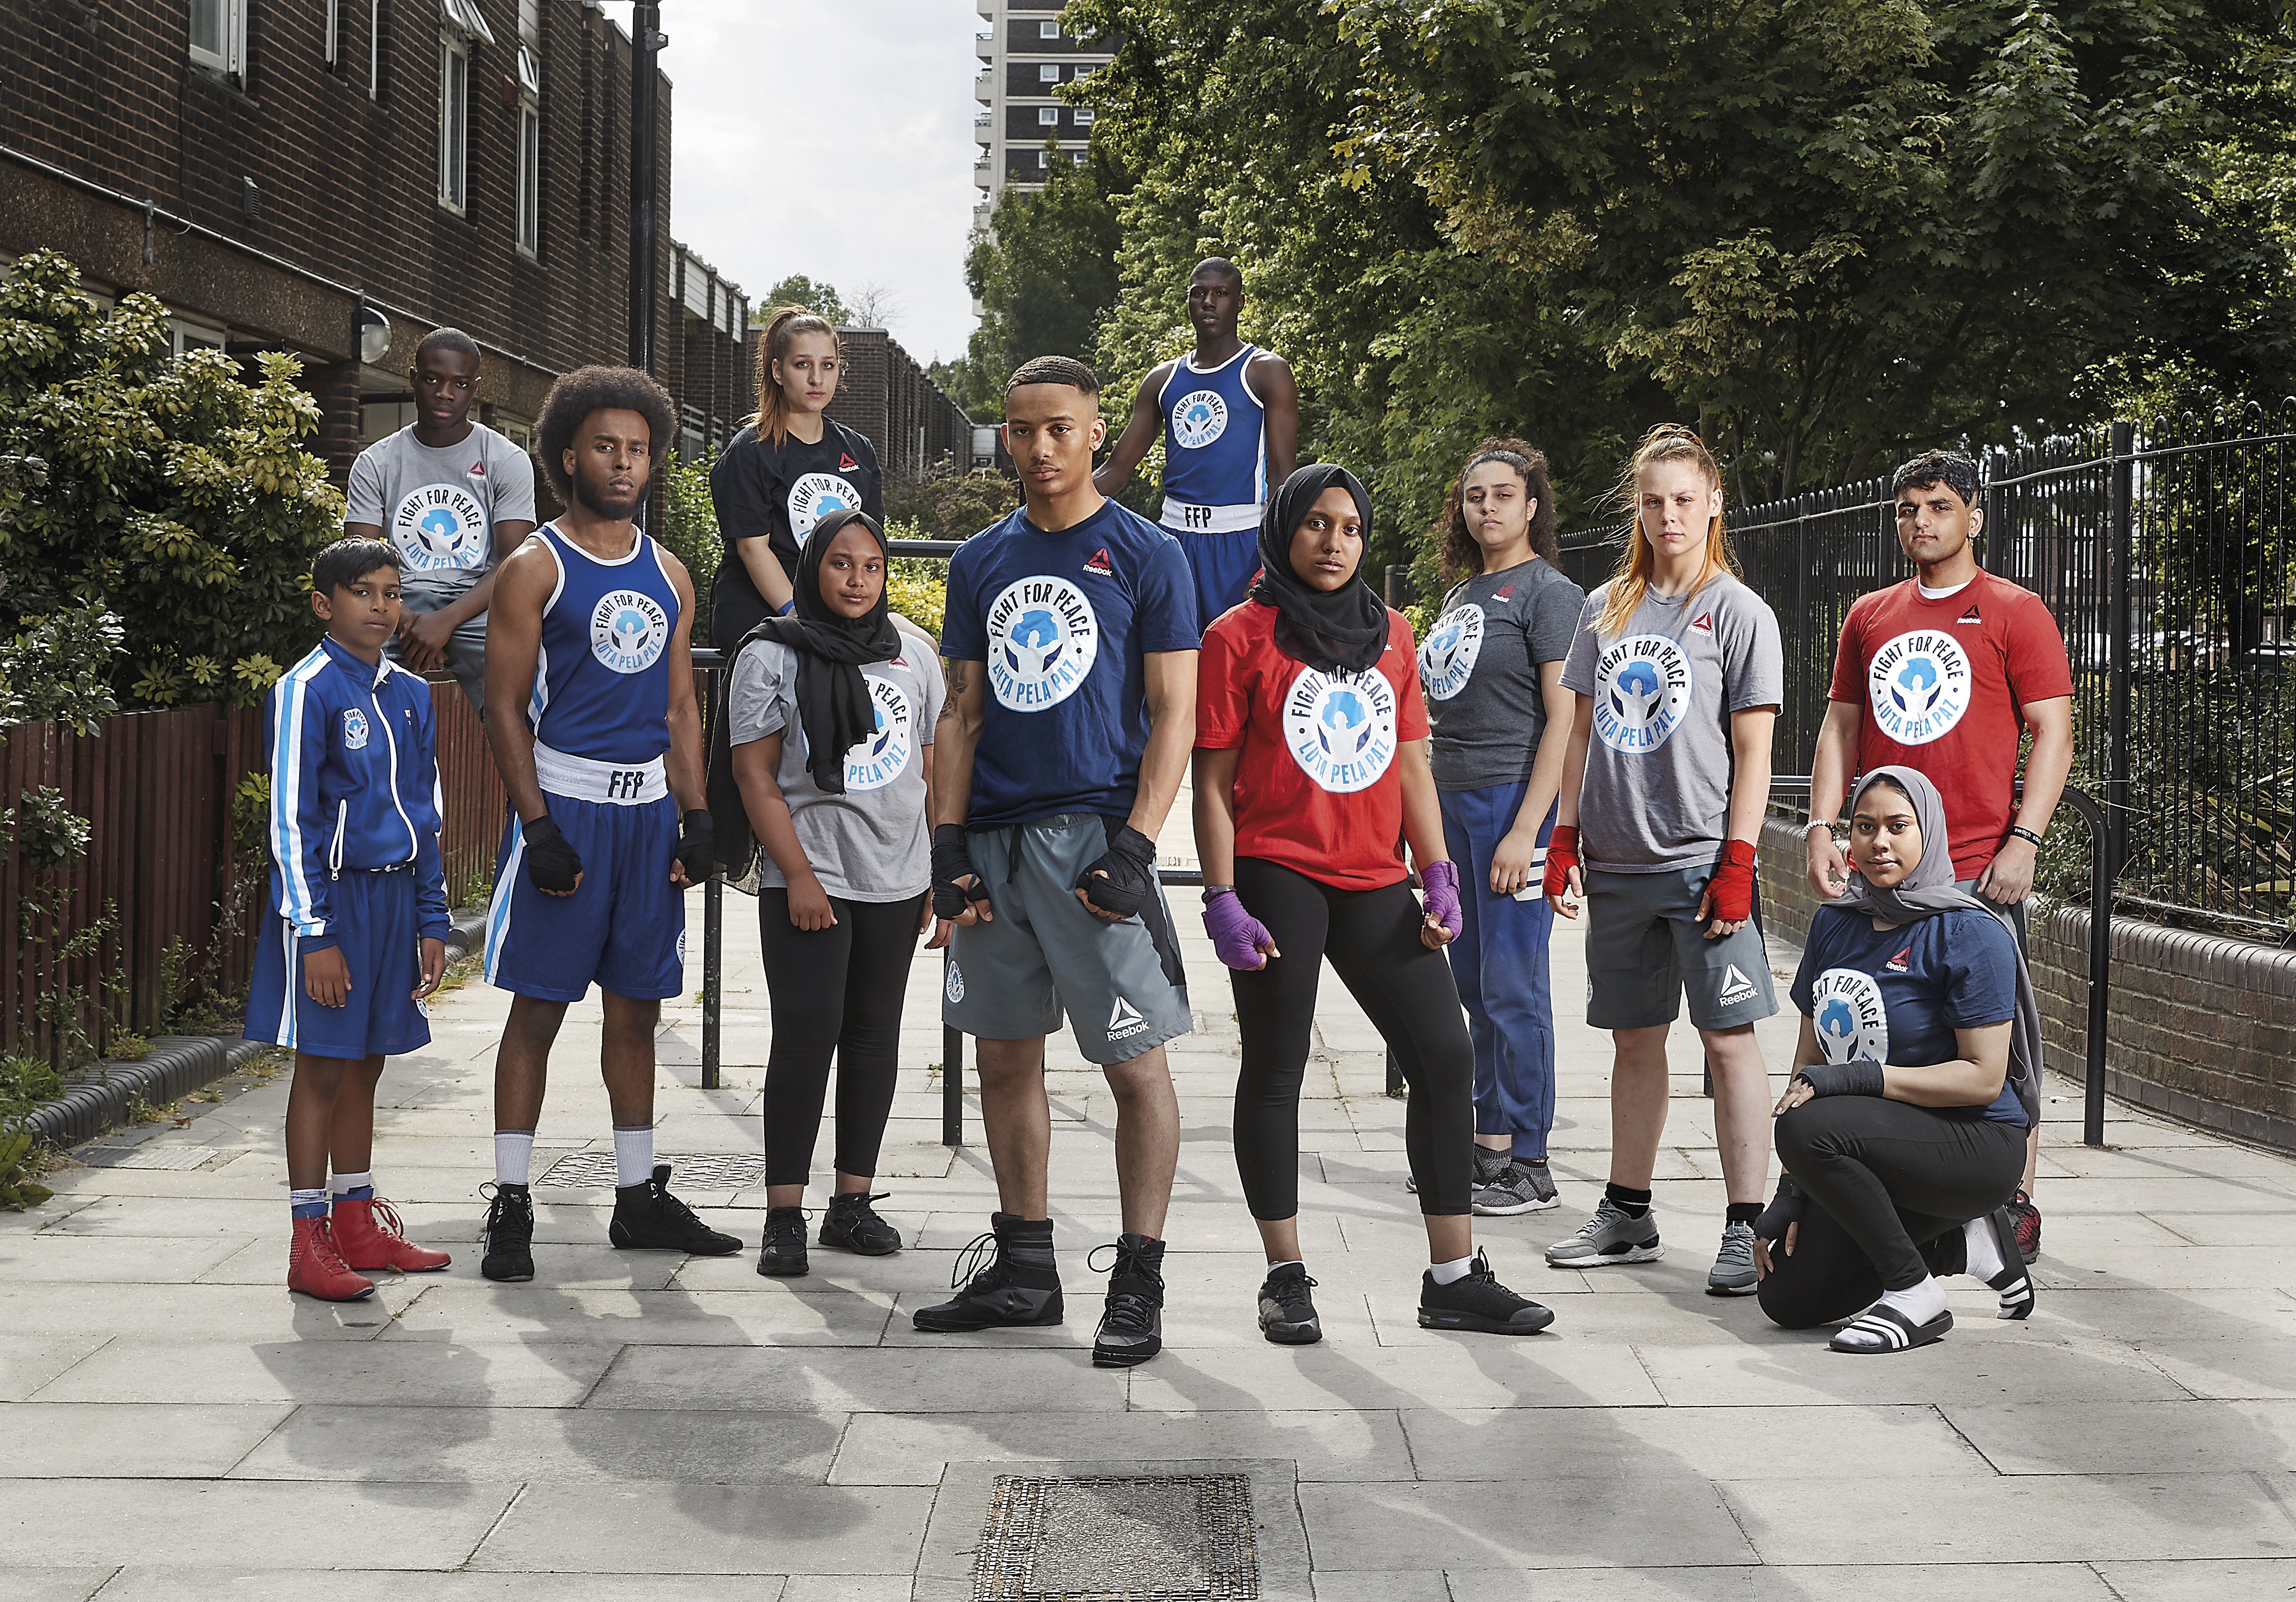 Group shot of young people in Fight for Peace t-shirts